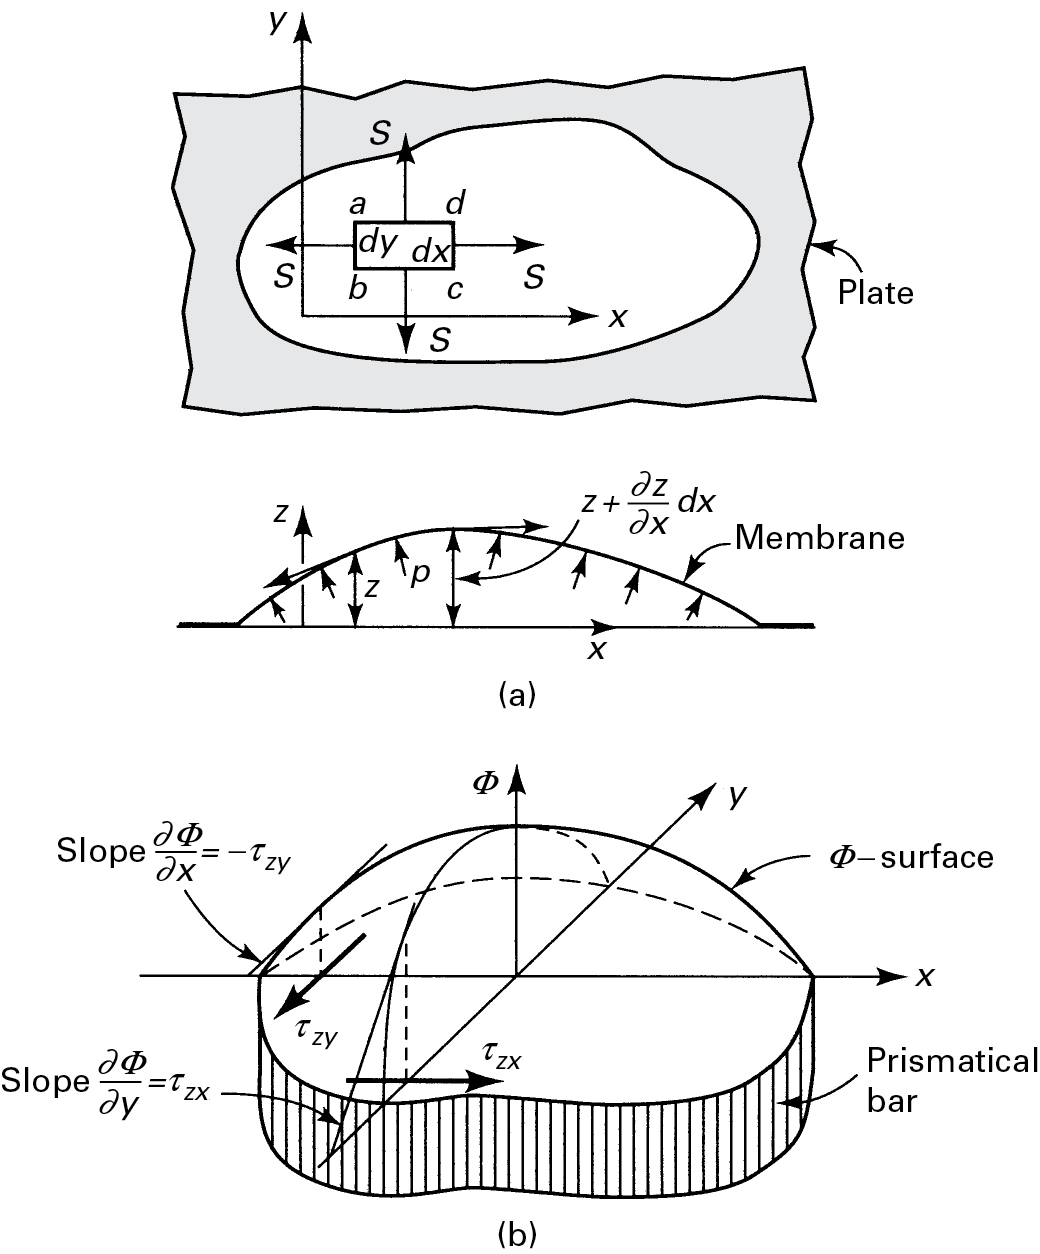 A figure depicts the membrane analogy for torsion members of the solid cross-section.